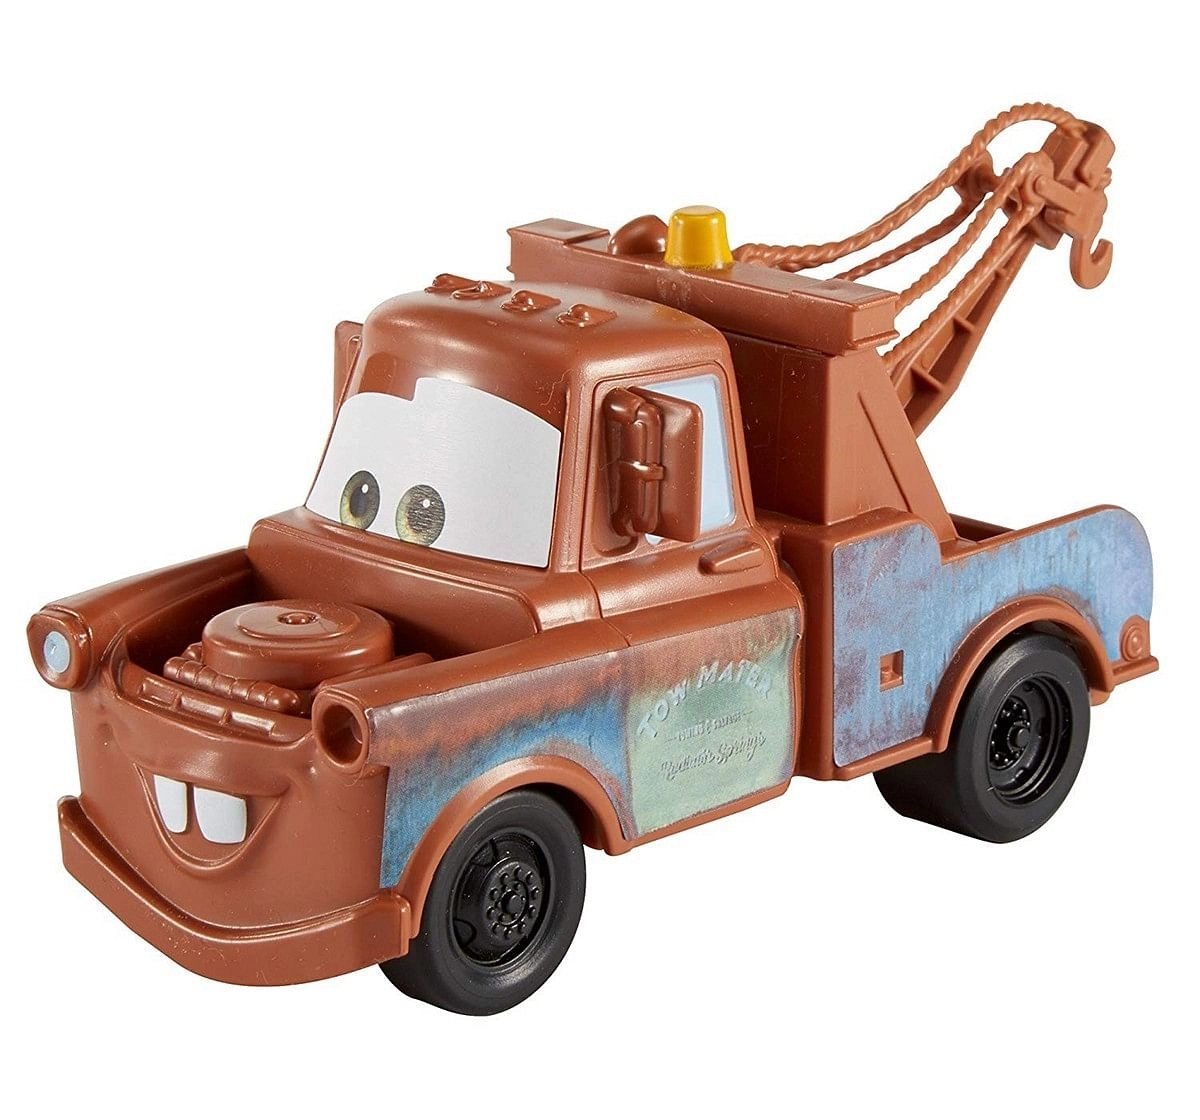 Disney Cars Value Vehicle Mater Vehicles for Kids age 3Y+, Assorted